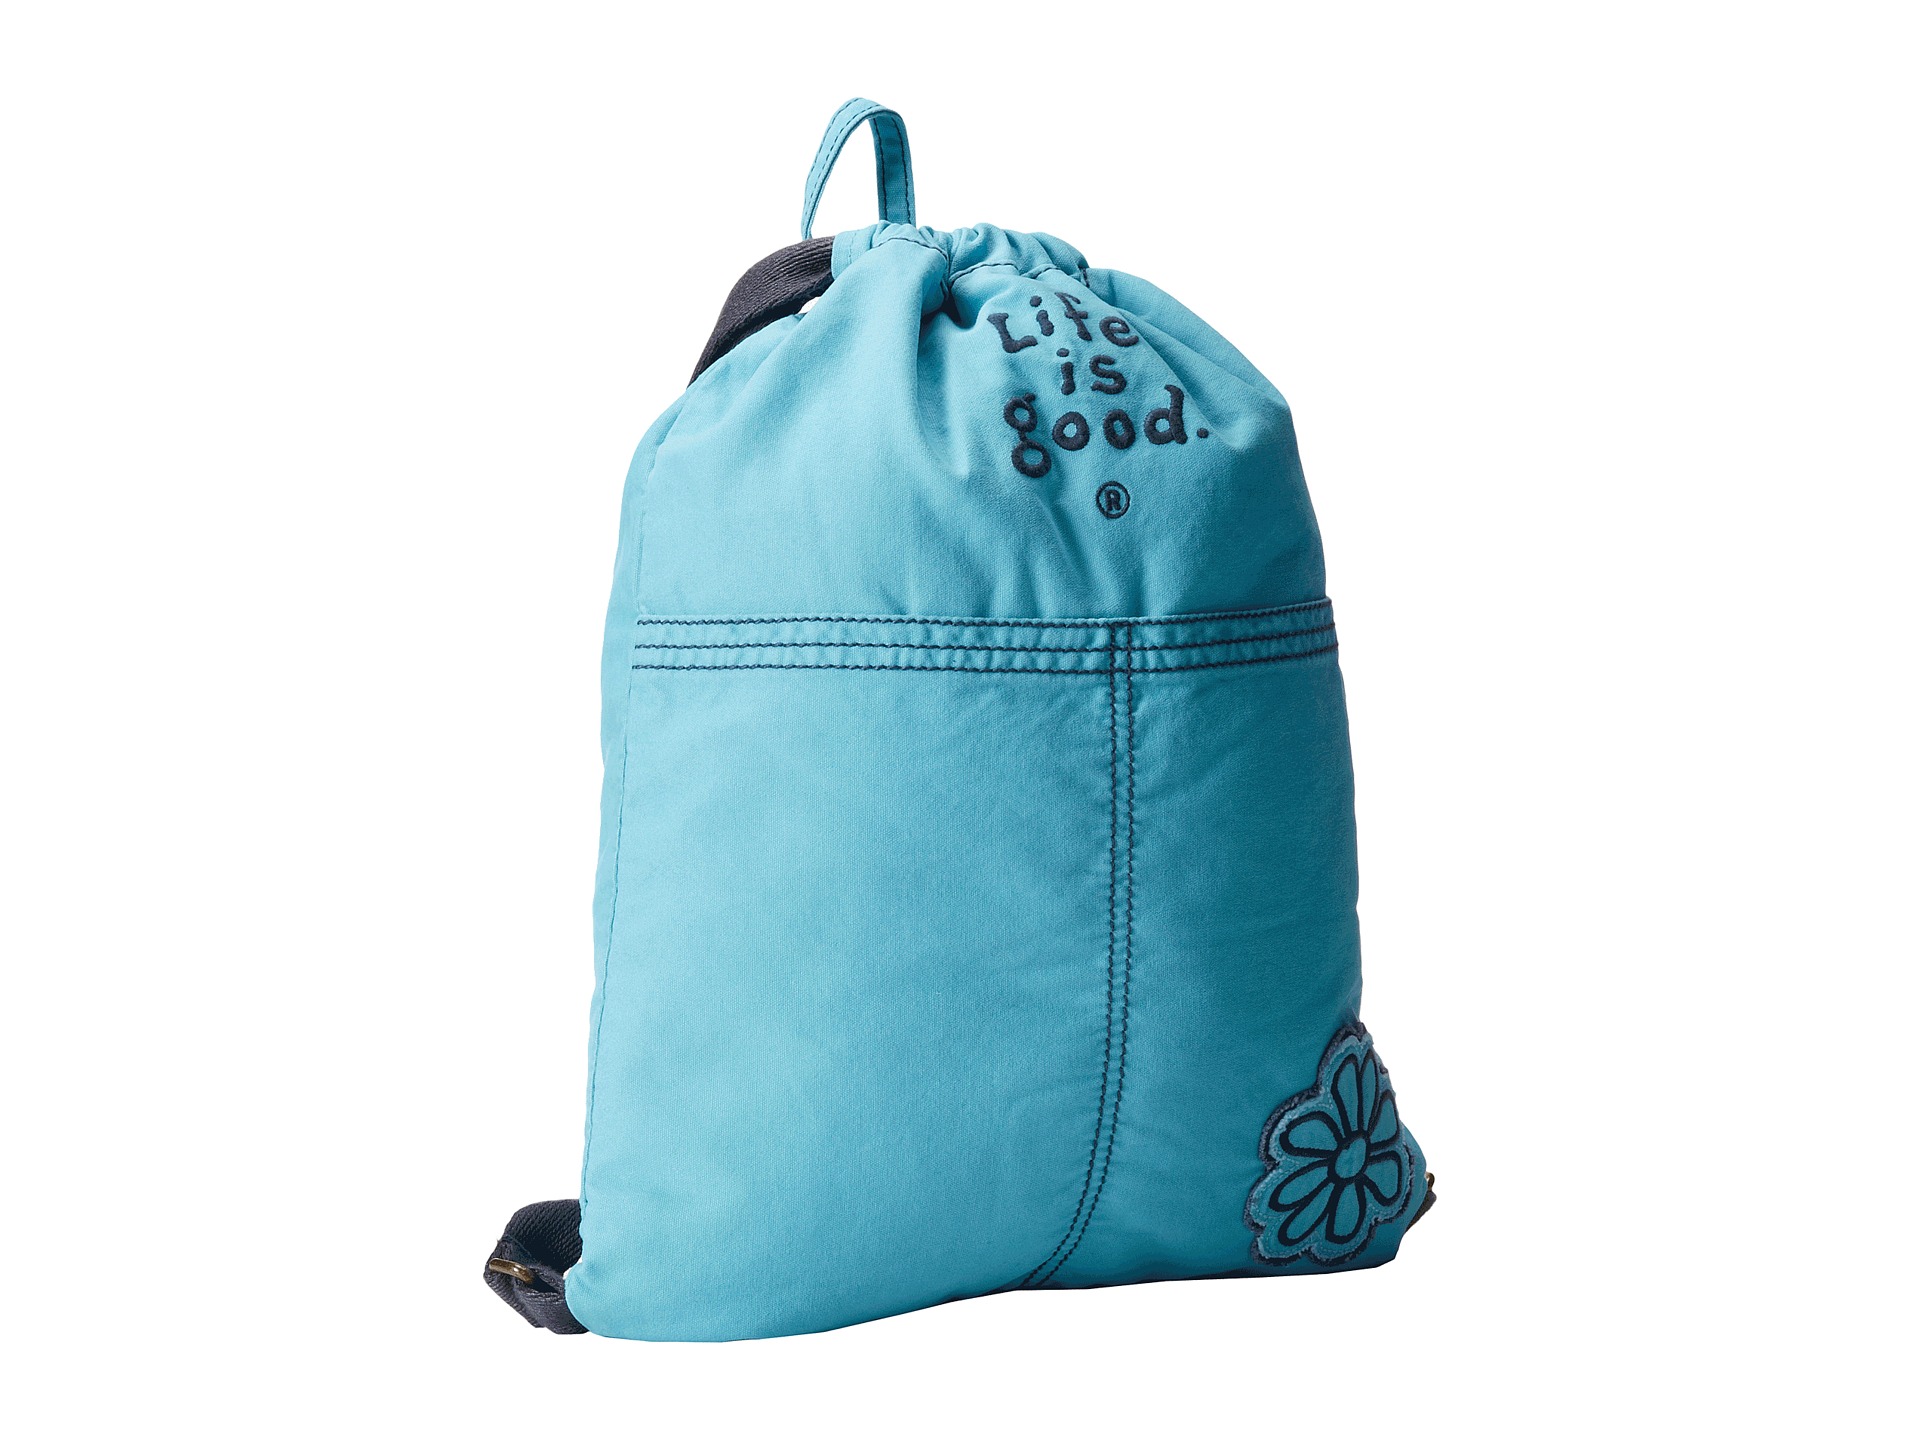 ... Is Good Essentials Cinch Sack Surfer Blue | Shipped Free at Zappos